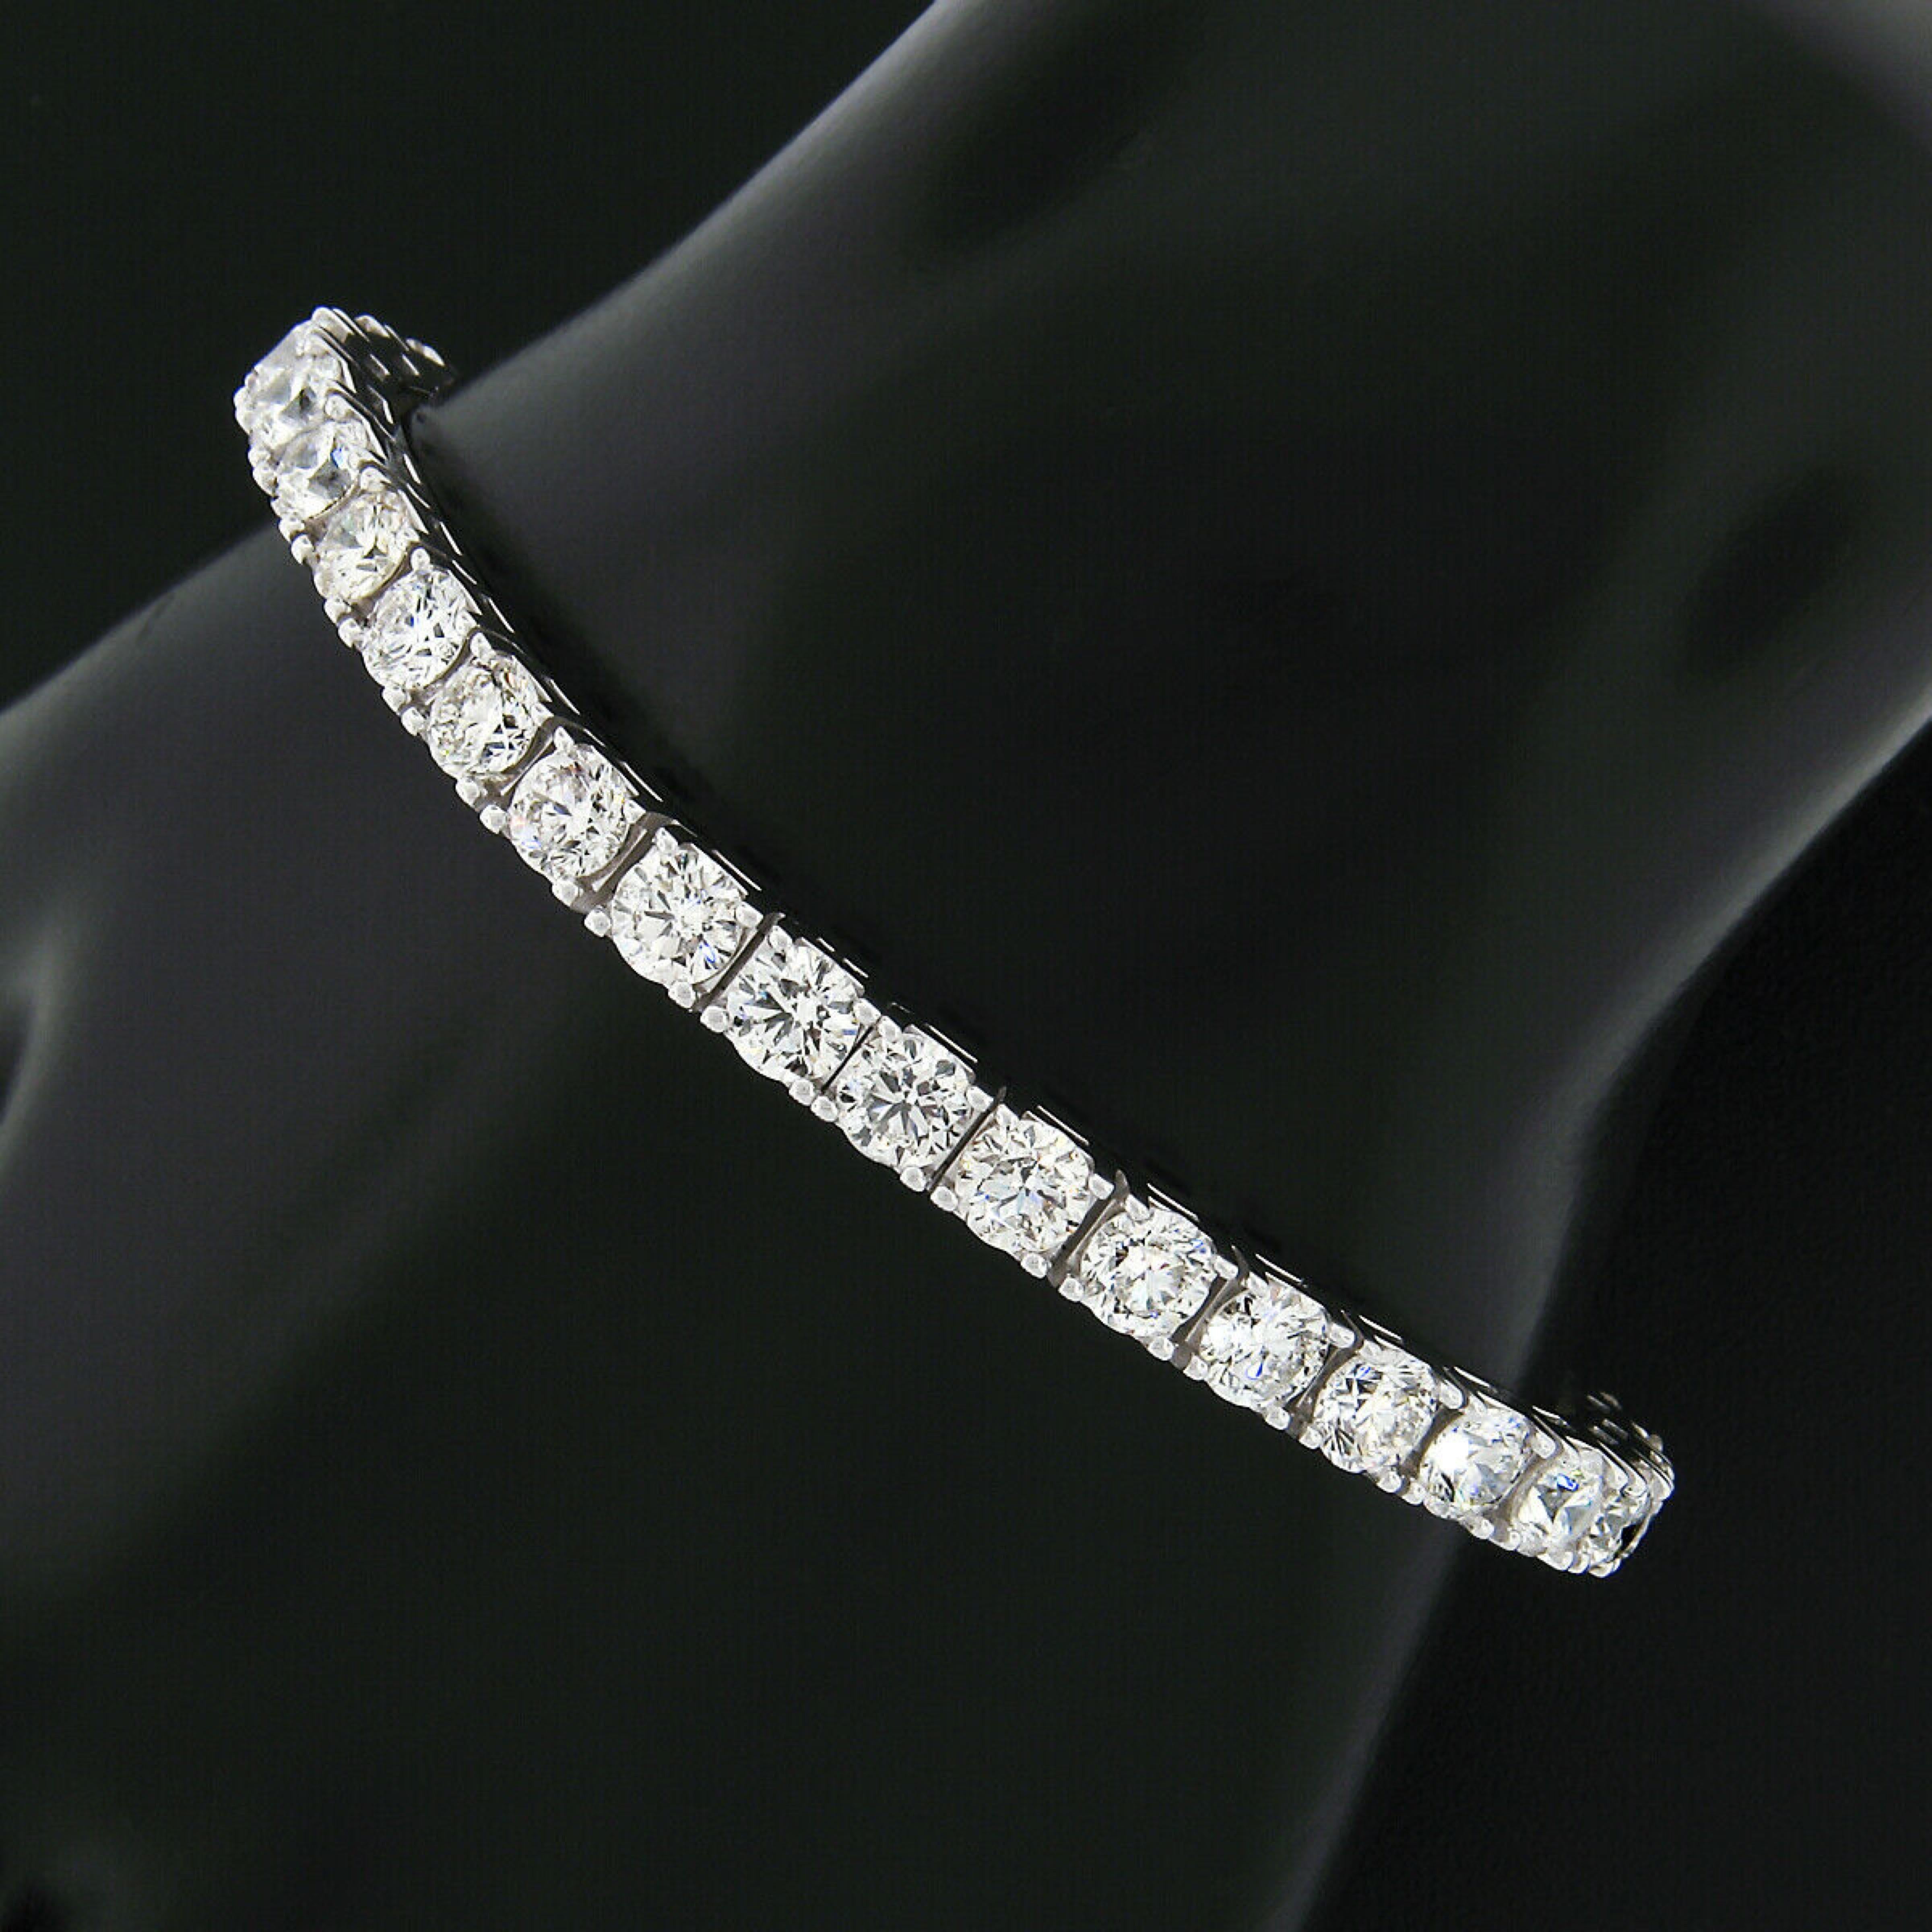 This breathtaking diamond statement tennis bracelet is newly crafted in solid 18k white gold and set with 37 fine quality and large round brilliant cut diamonds. The diamonds are mounted in solid and sturdy, squared 4-prong baskets with the most